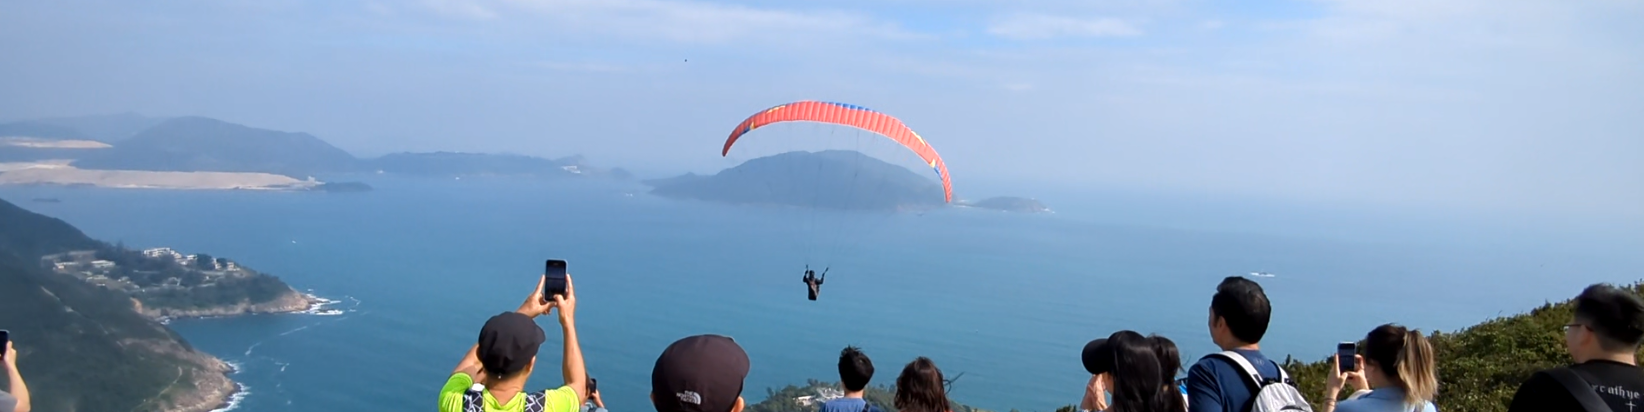 We happened to spot a paraglider launching on the way down